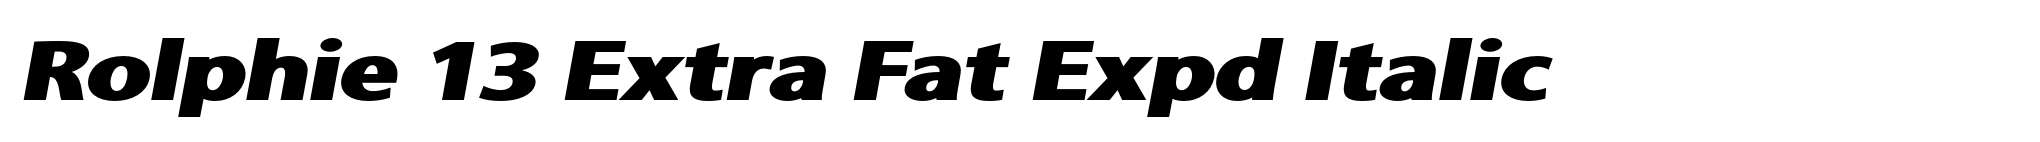 Rolphie 13 Extra Fat Expd Italic image